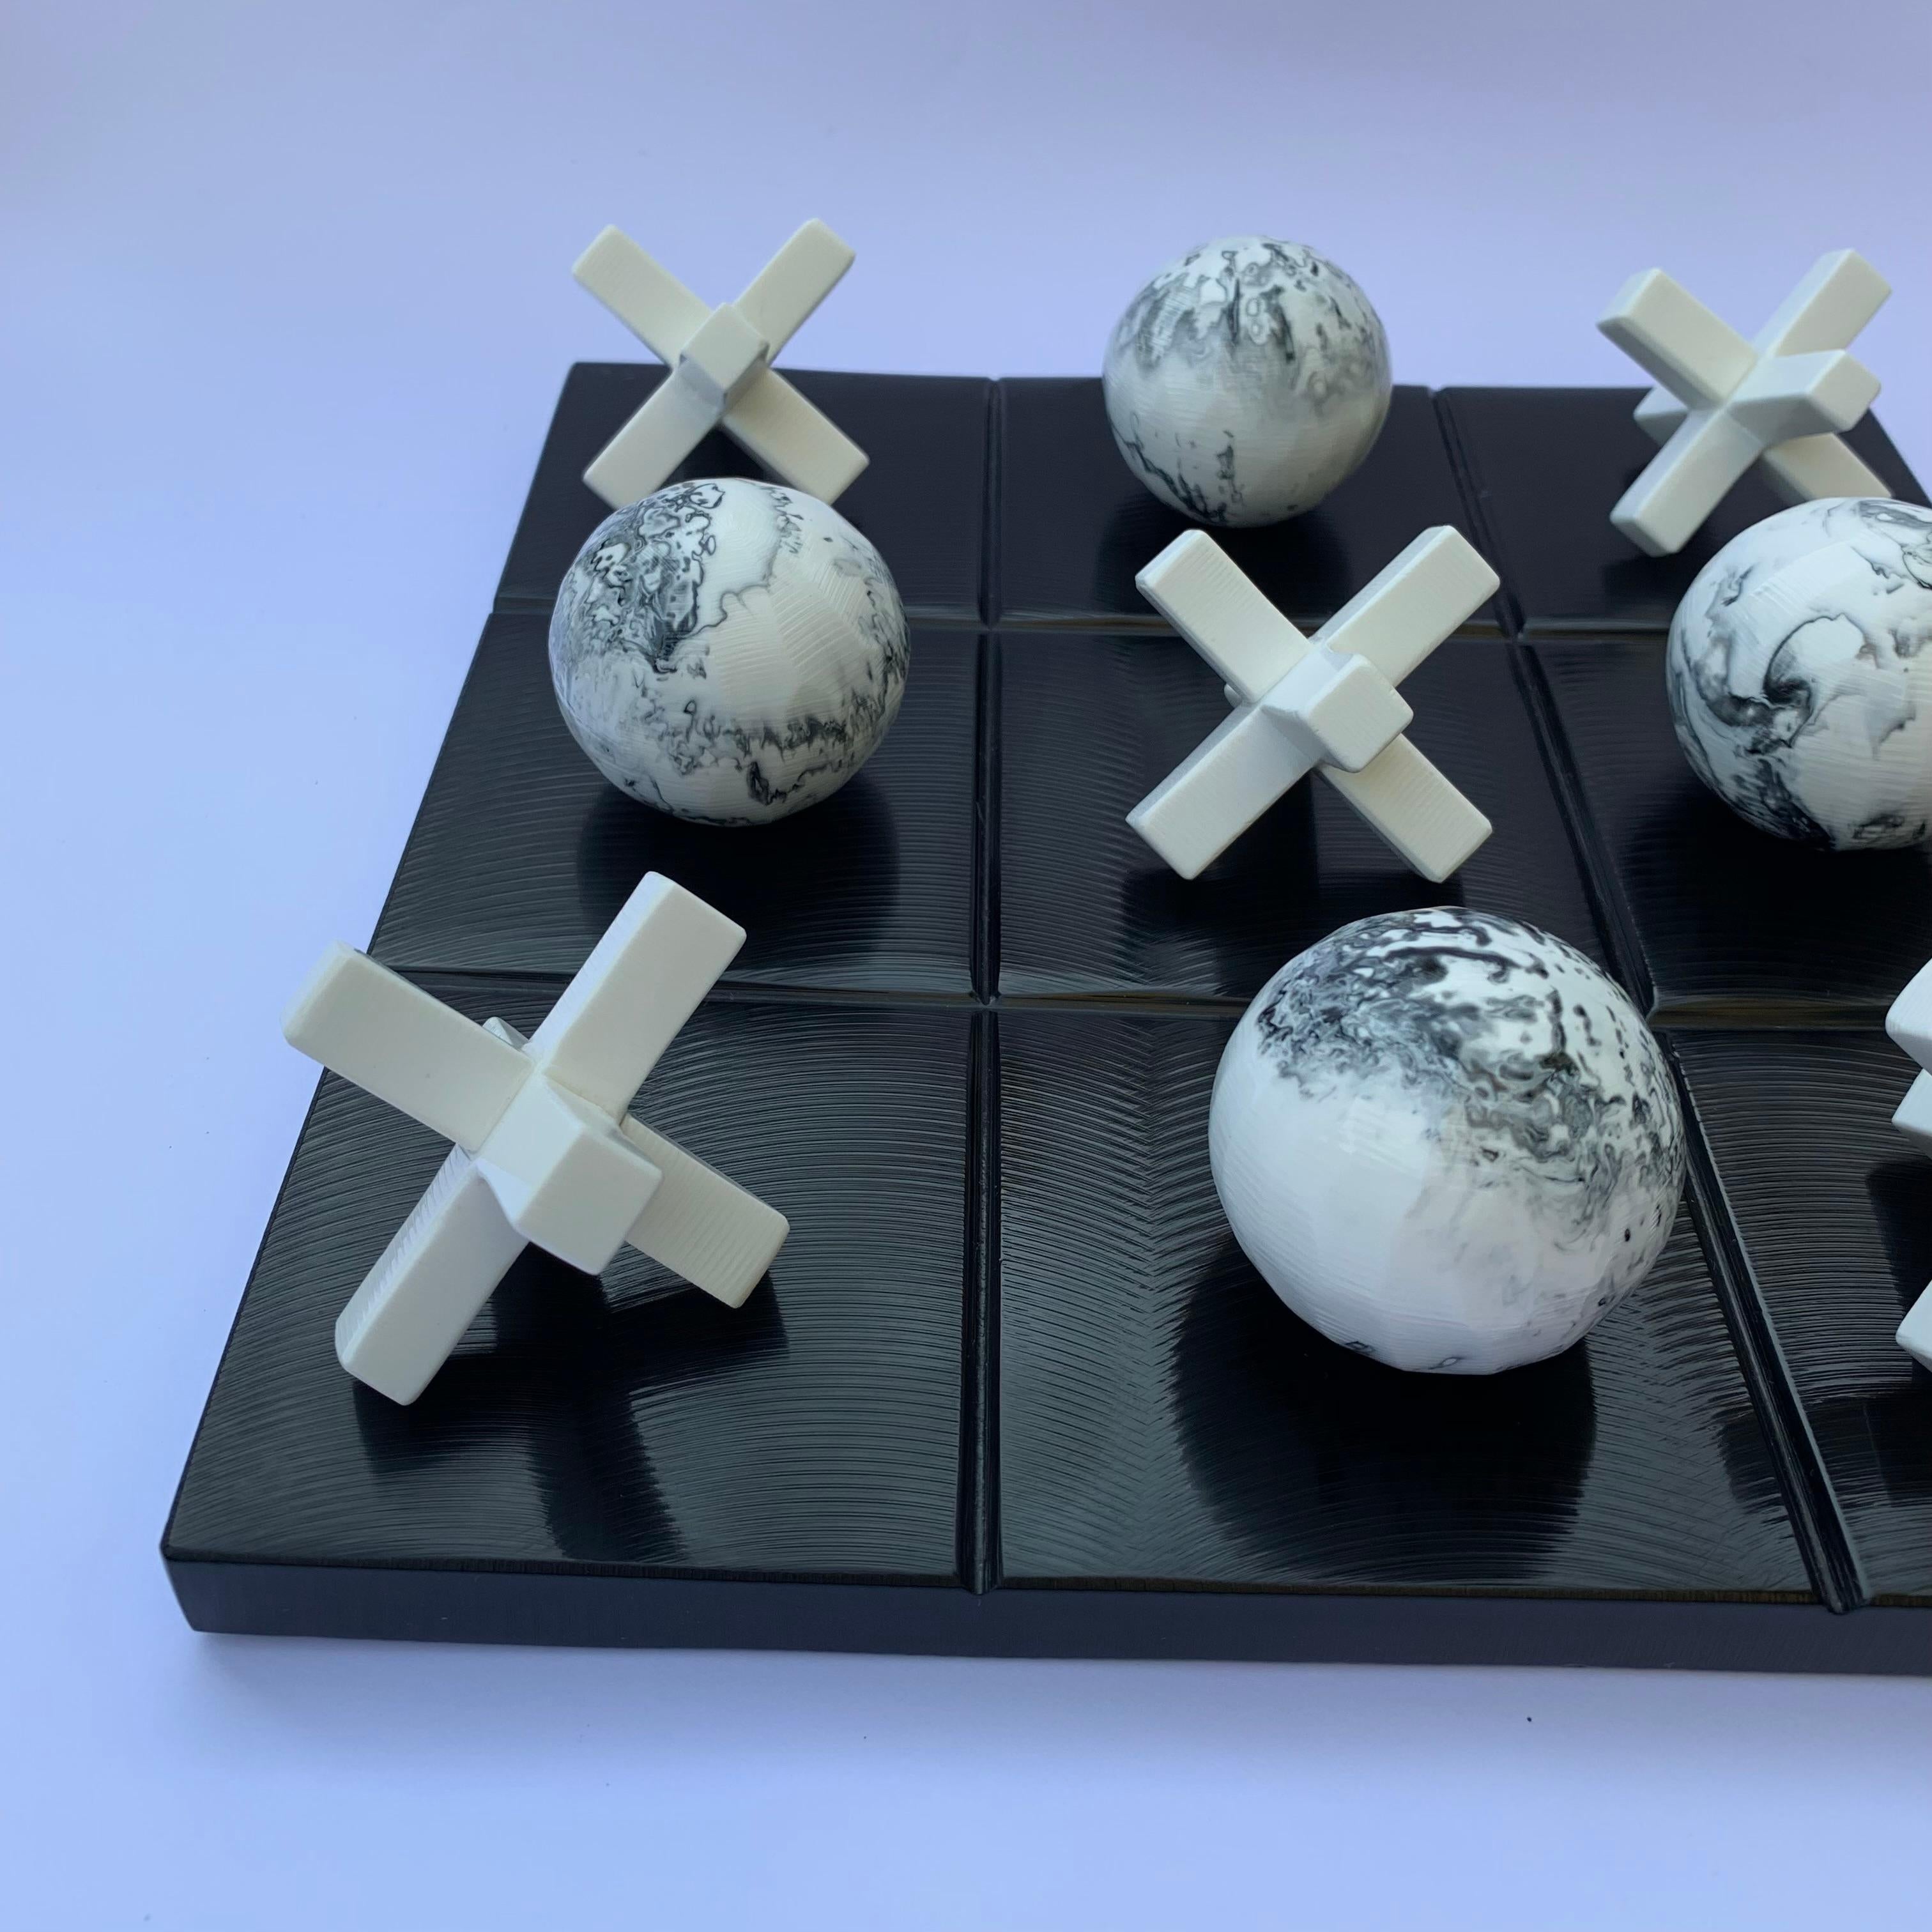 Our Tic Tac Toe is a beautiful, modern and fun take on the classic game. The three dimensional pieces are handmade in white resin with black marbled texture and the board is made of black textured resin. It will be the coolest statement piece on any